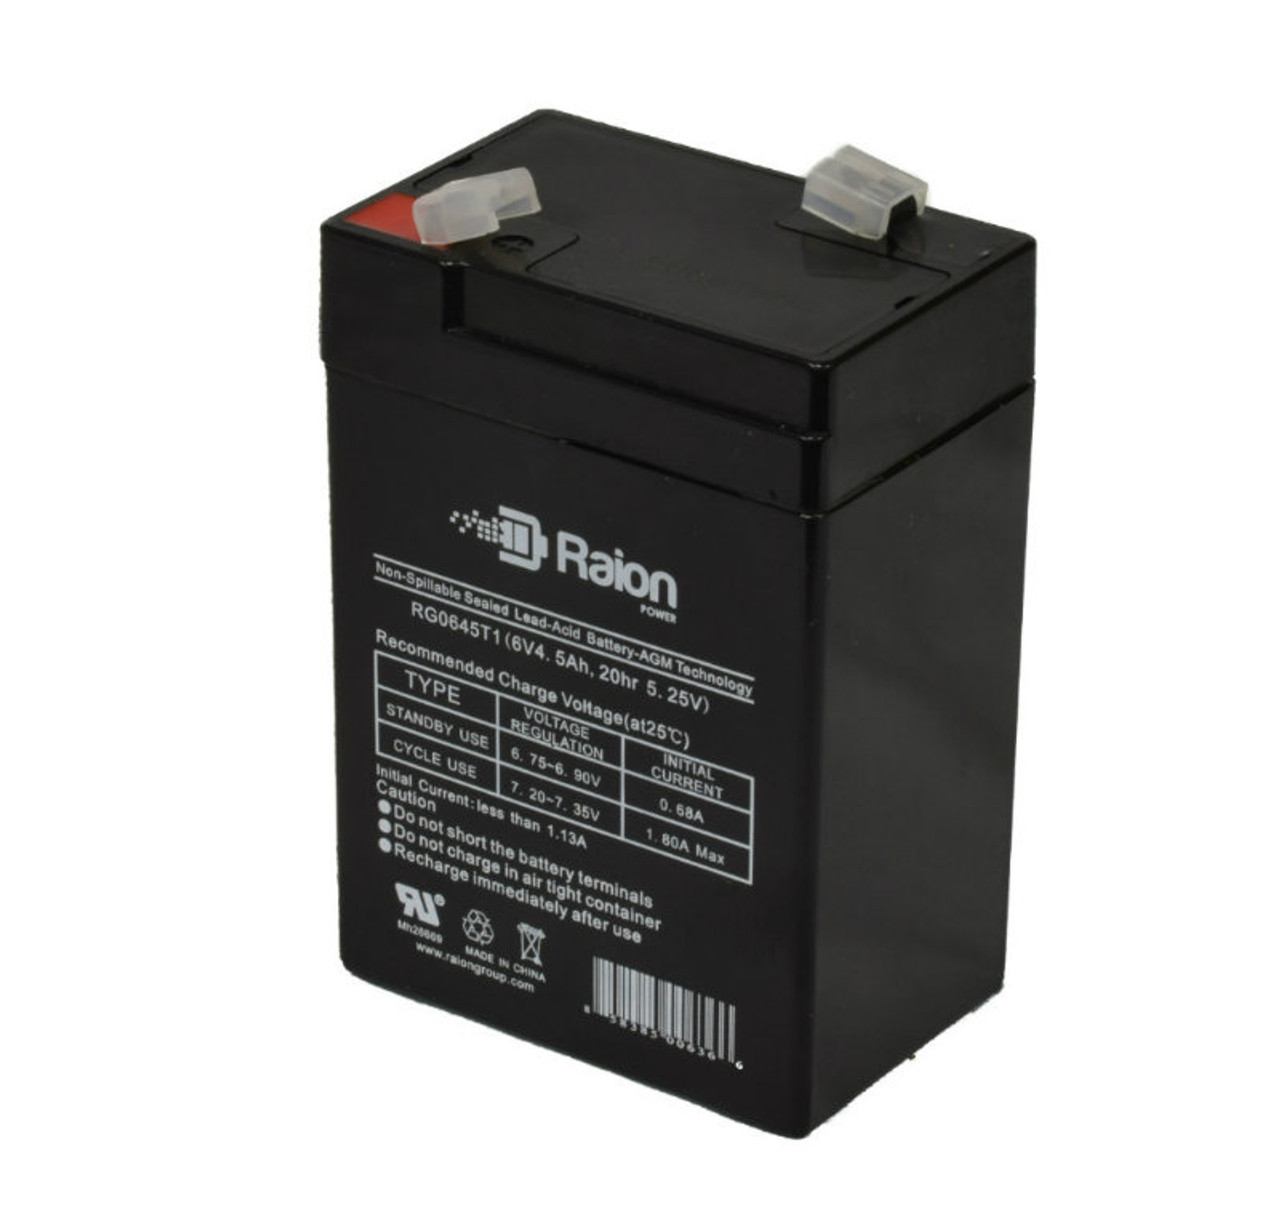 Raion Power RG0645T1 6V 4.5Ah Replacement Battery Cartridge for Baace CB5-6T